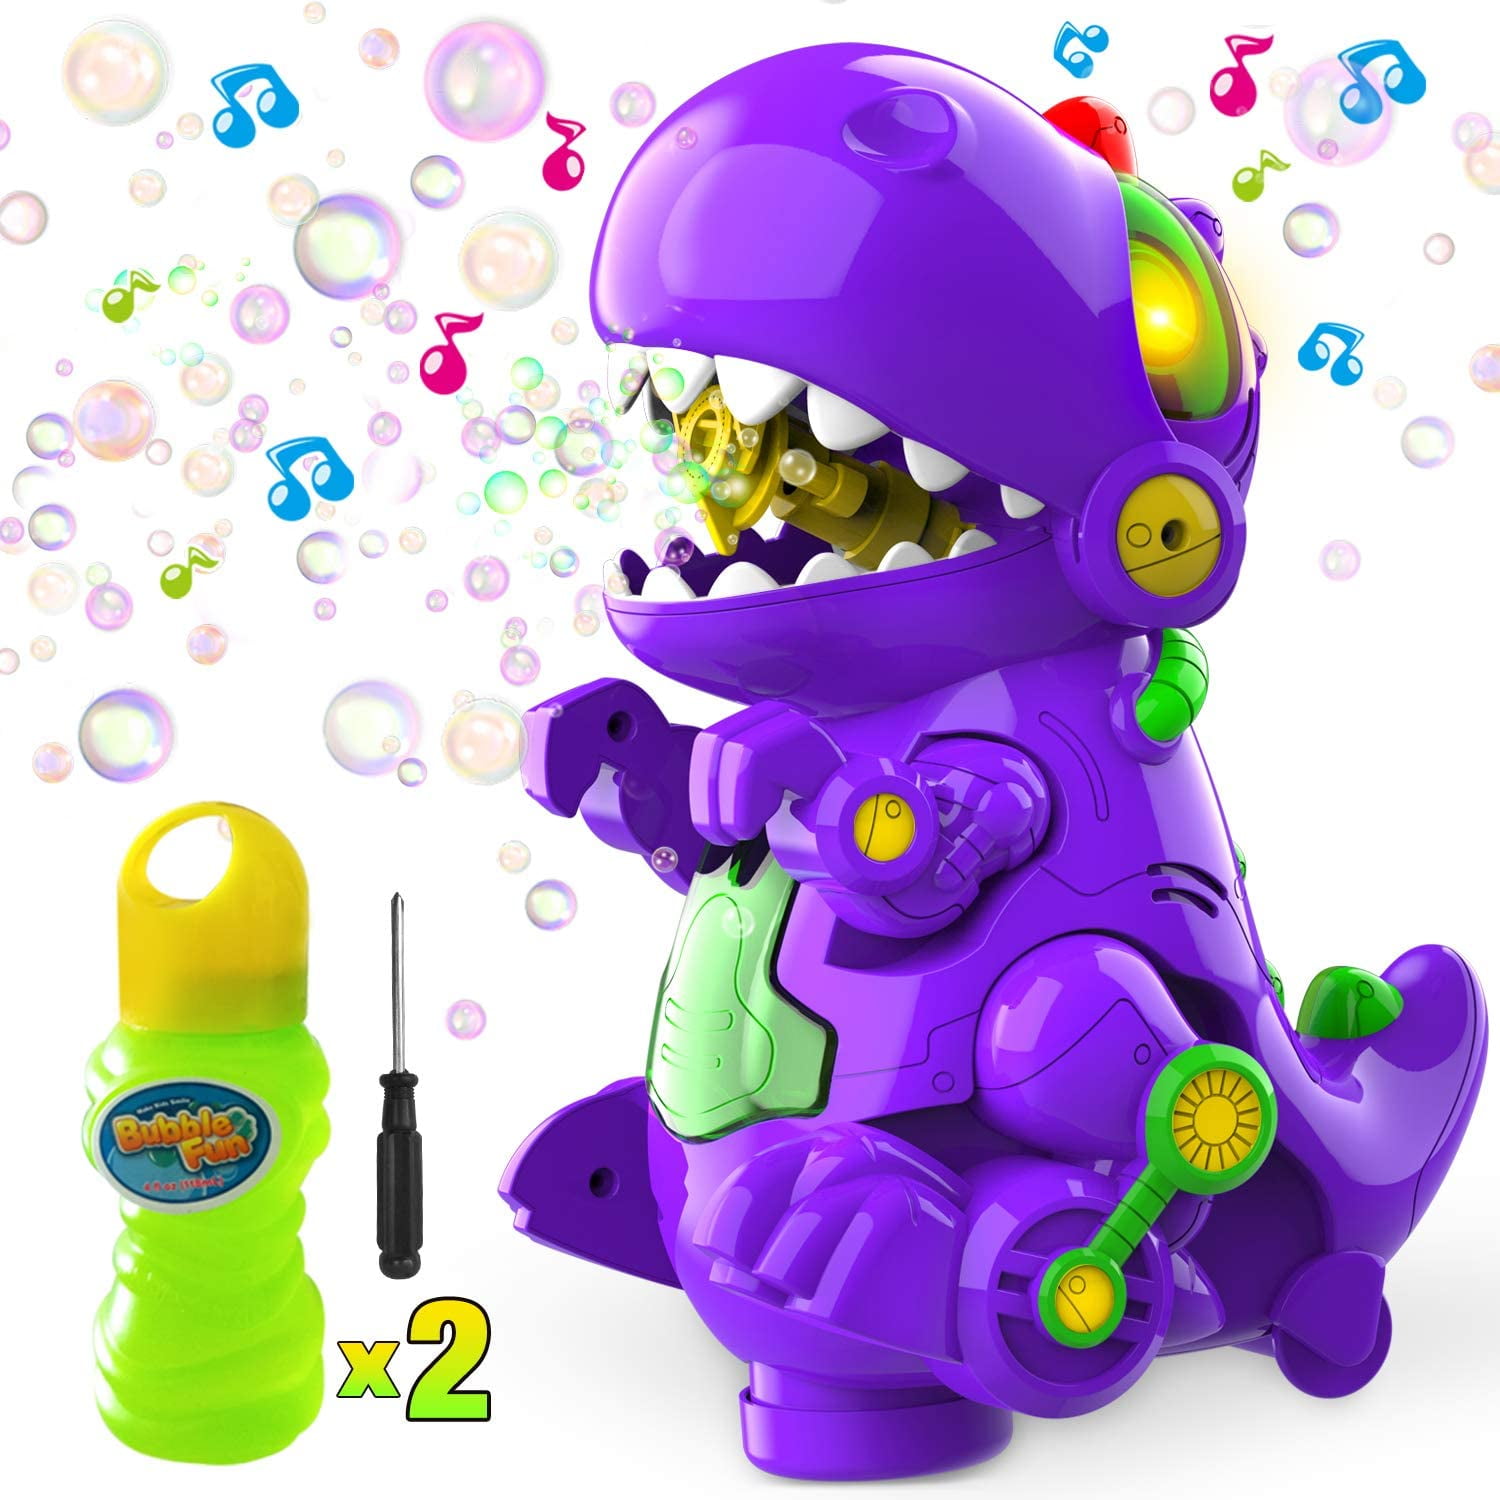 Leakage Free Bubble Machine for Kids Includes Two Bottles of Bubble Solution Mobile & Stationery Two Settings SMJQ 2021 New Dinosaur Bubble Machine Toy for Toddlers Kids,Sound and Light Effects 